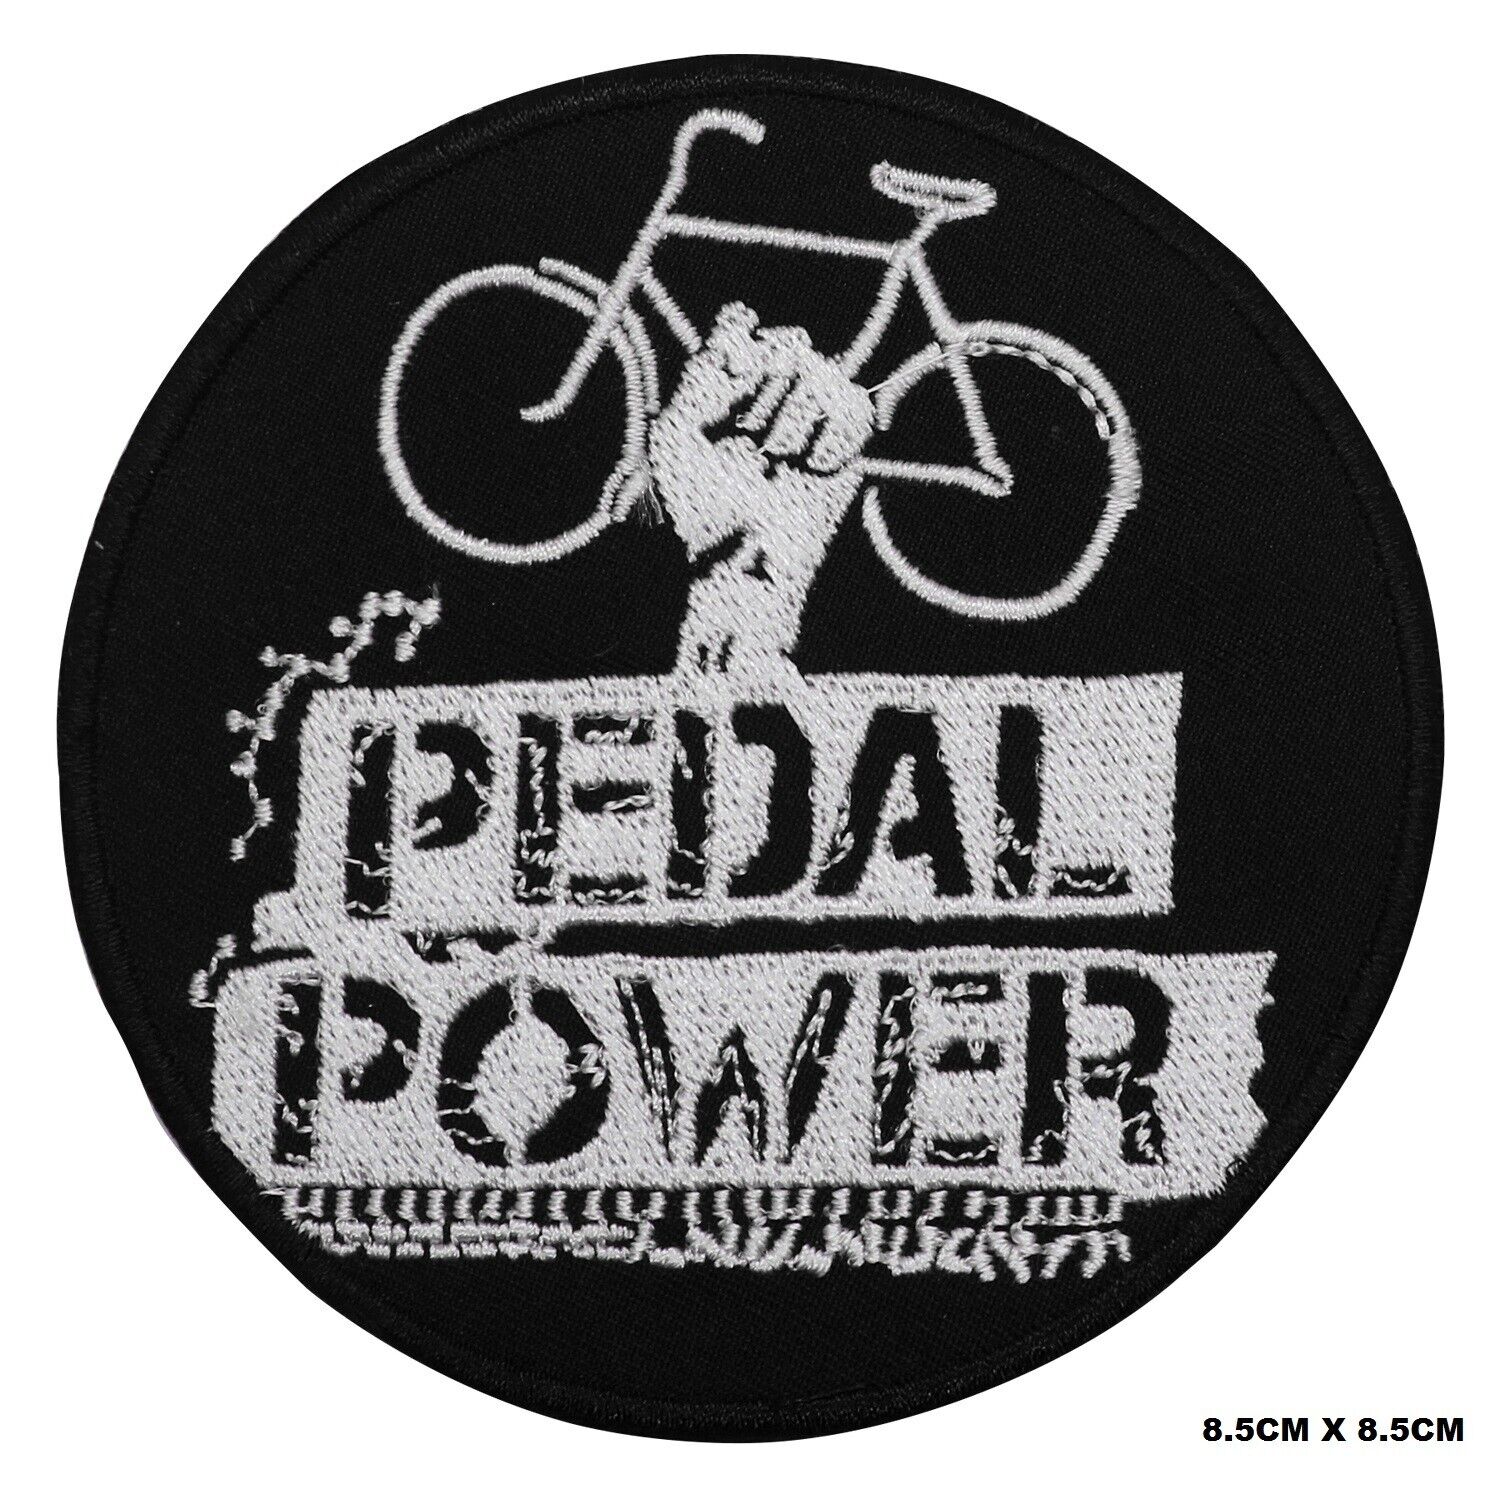 Pedal Power Cyclist Embroidered Patch Iron On/Sew On Patch Batch For Clothes